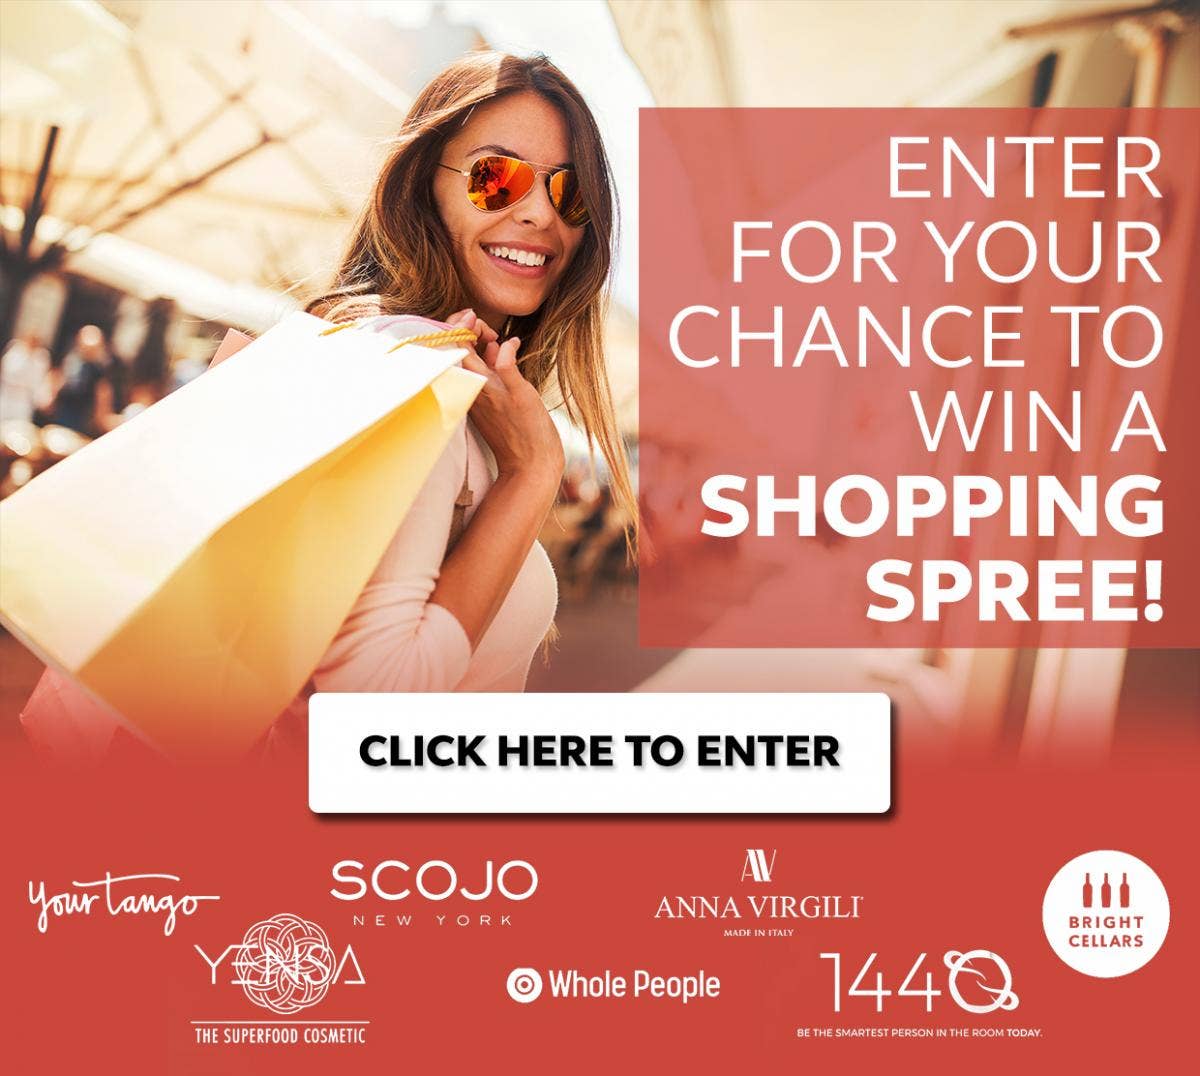 Shopping spree giveaway from bright cellars and YourTango